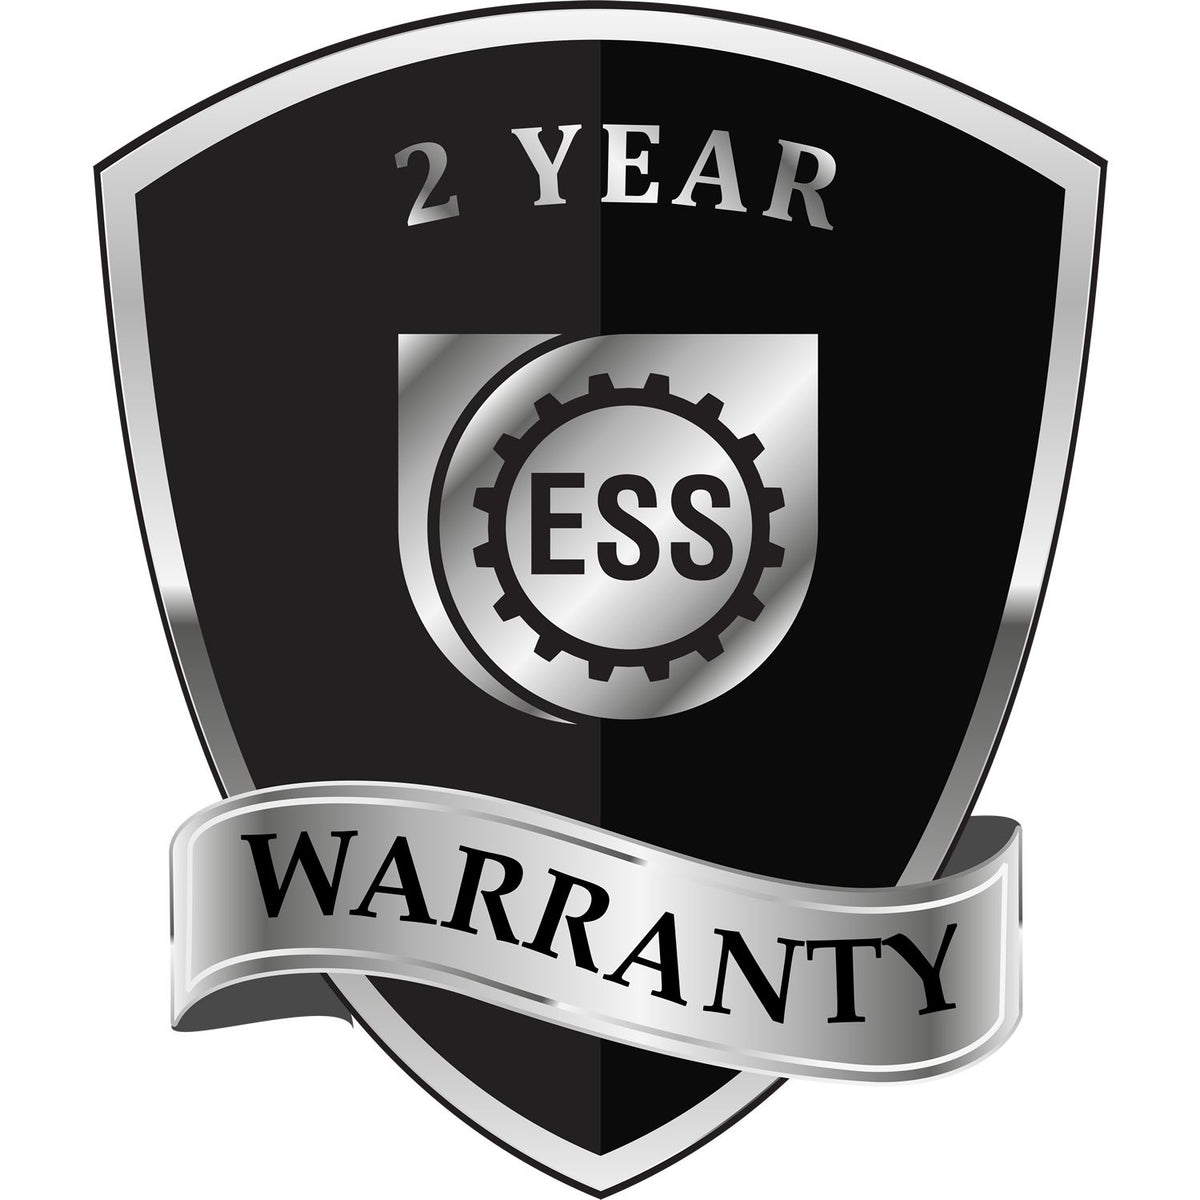 A badge or emblem showing a warranty icon for the Long Reach New Mexico PE Seal